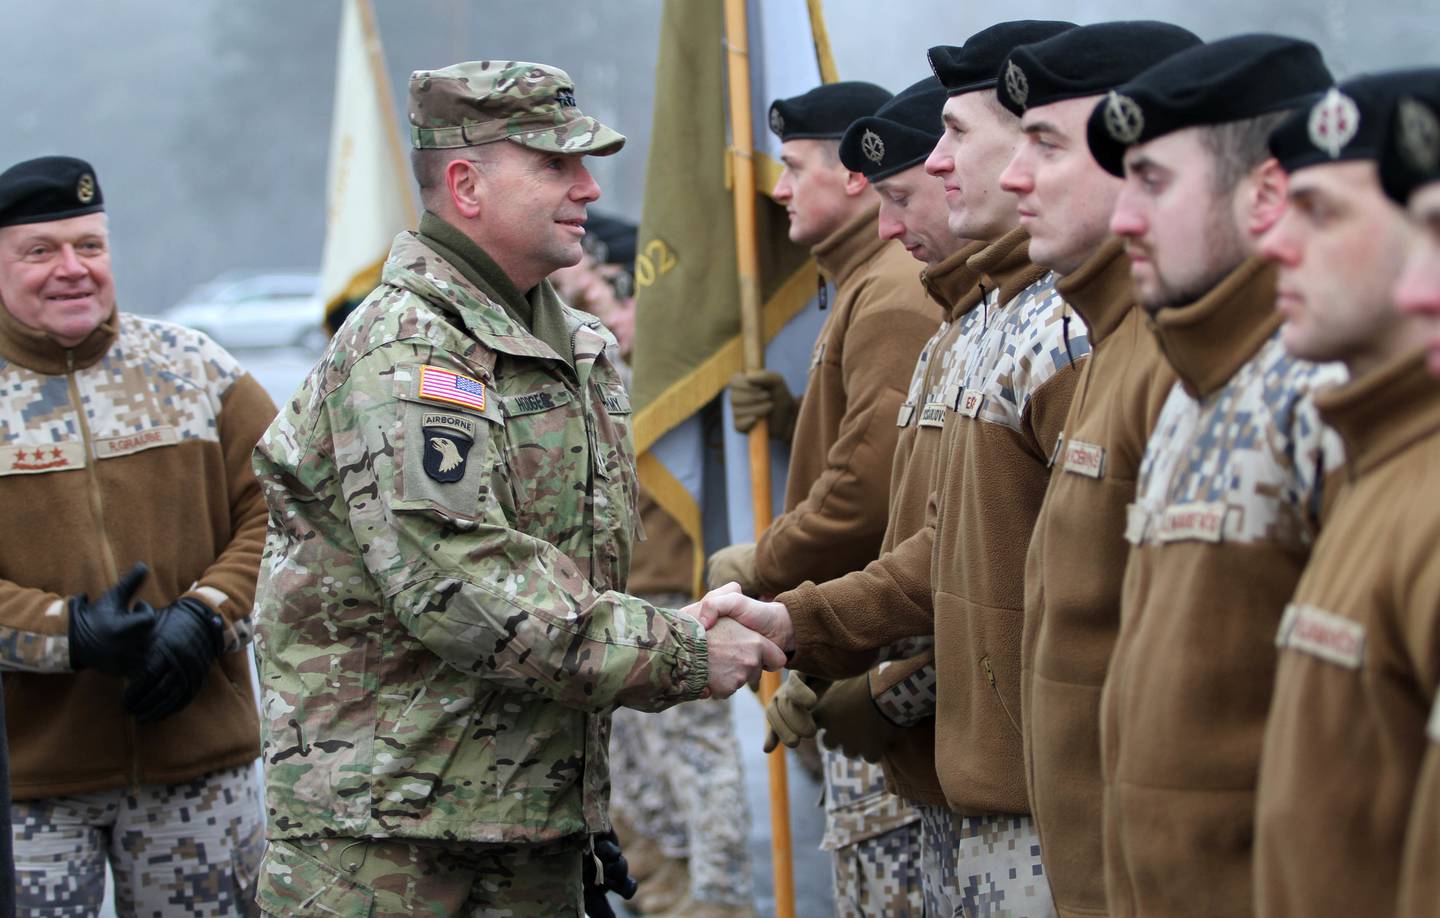 In this January 19, 2015 US Amry handout photo, Lt. Gen. Ben Hodges(C), commander of US Army thanks Latvian soldiers at Operation Atlantic Resolve's official welcome ceremony for 2nd Cavalry Regiment in Adazi, Latvia. Looking on is Lt. Gen. Raimond Graube(L), Latvian National Armed Forces commander.  AFP PHOTO /HANDOUT / US ARMY / PFC JACCOB HEARN                     == RESTRICTED TO EDITORIAL USE / MANDATORY CREDIT: "AFP PHOTO / HANDOUT / US ARMY / PFC JACCOB HEARN "/ NO MARKETING / NO ADVERTISING CAMPAIGNS / NO A LA CARTE SALES / DISTRIBUTED AS A SERVICE TO CLIENTS ==